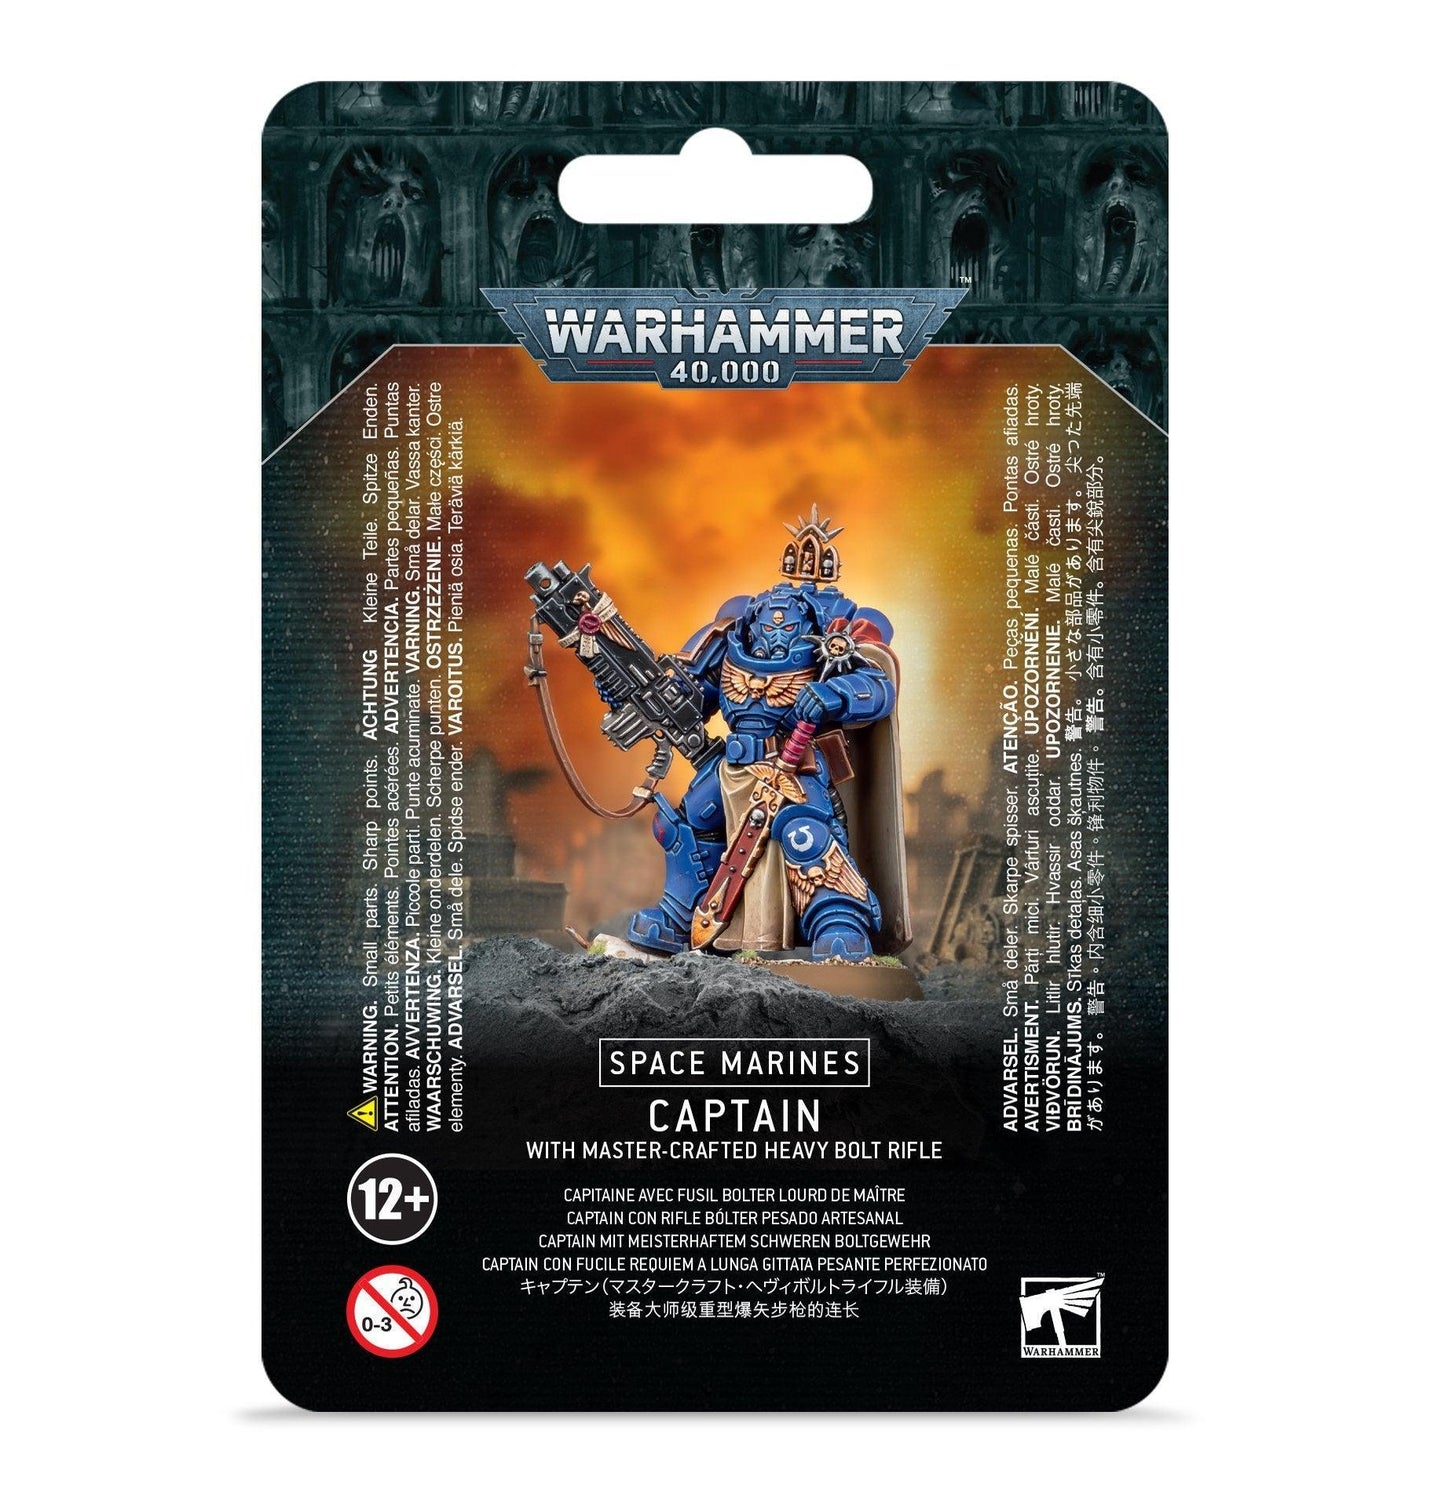 SPACE MARINES CAPTAIN WITH MASTER-CRAFTED HEAVY BOLT RIFLE - ZZGames.dk